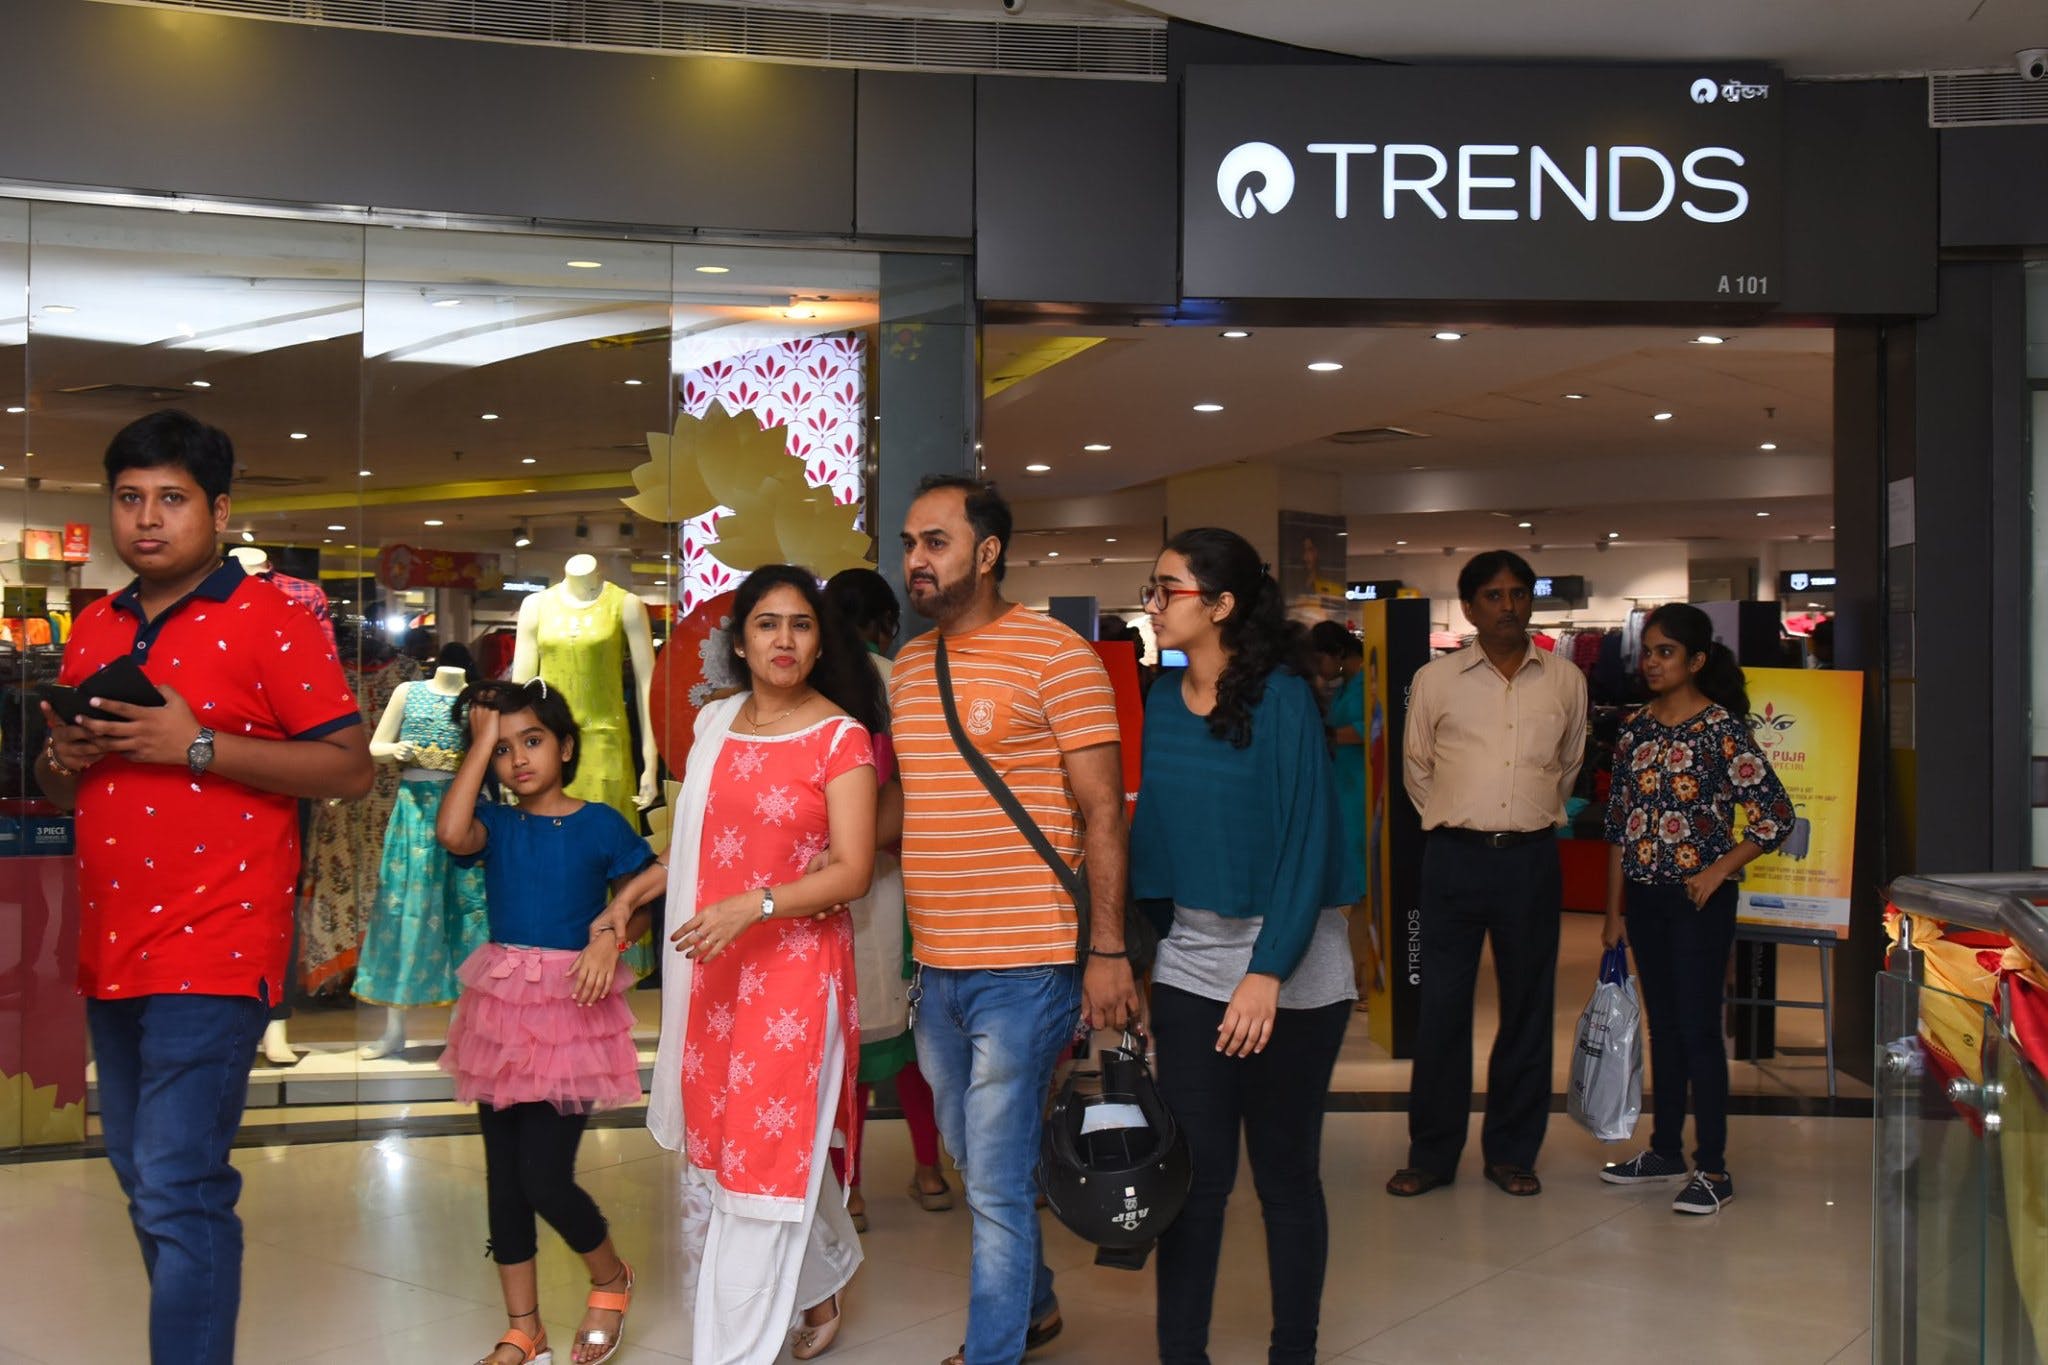 reliance trends jeans offer